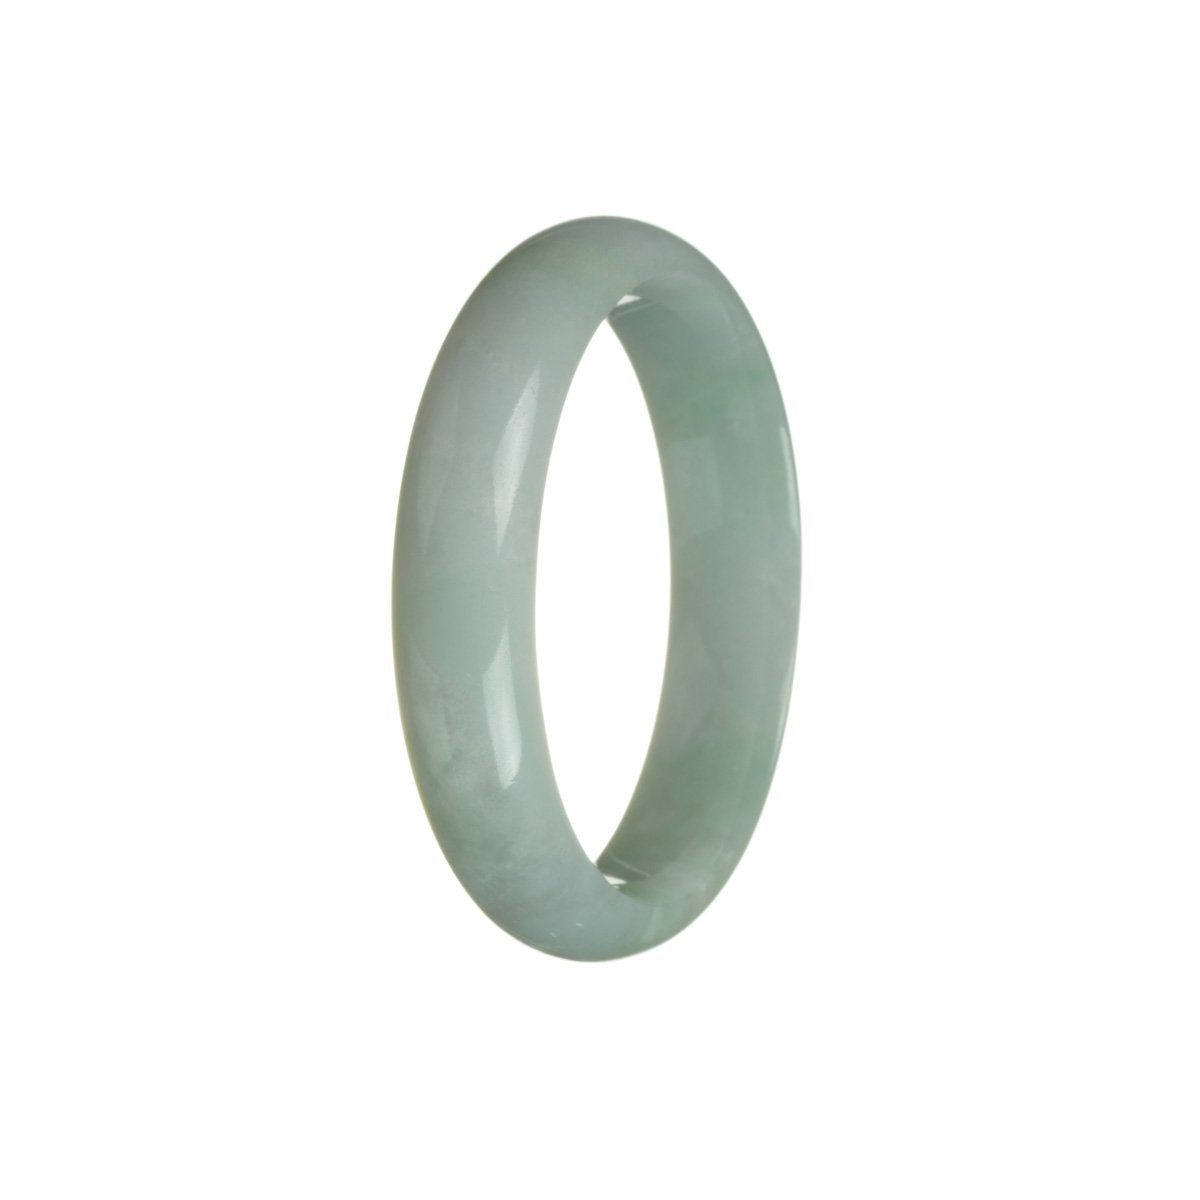 Close-up of a pale lavender jadeite jade bangle with a half moon shape. The bangle is certified Grade A Green and measures 56mm in diameter. Exquisite craftsmanship by MAYS GEMS.